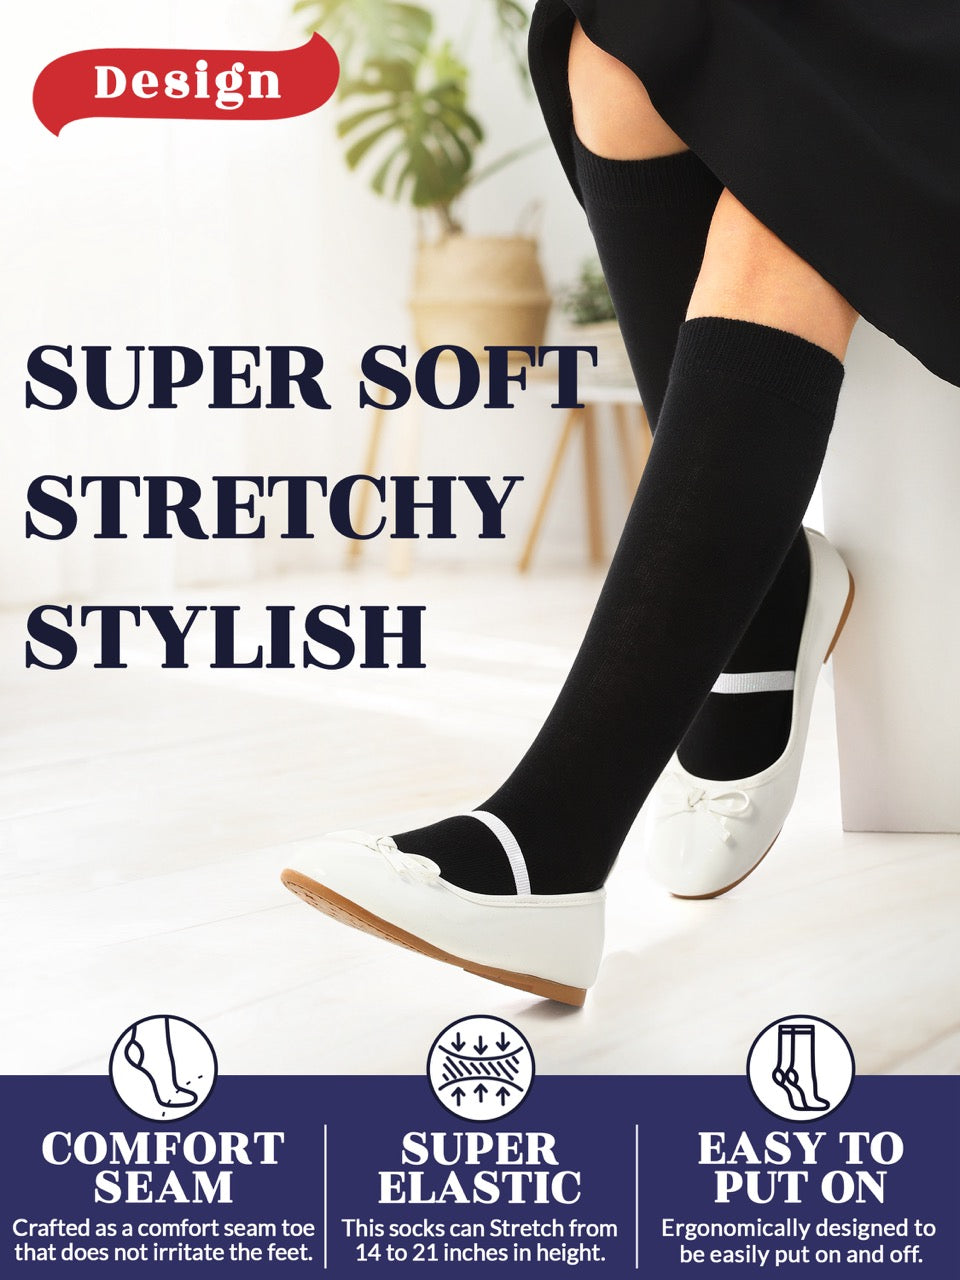 Experience the ultimate comfort and style with Hugh Ugoli Kids Bamboo School Socks. These black socks perfect for school or everyday wear, our high-quality knee-high socks meet uniform standards while reducing blisters and staying in place. Available in four sizes for children aged 3-14 years